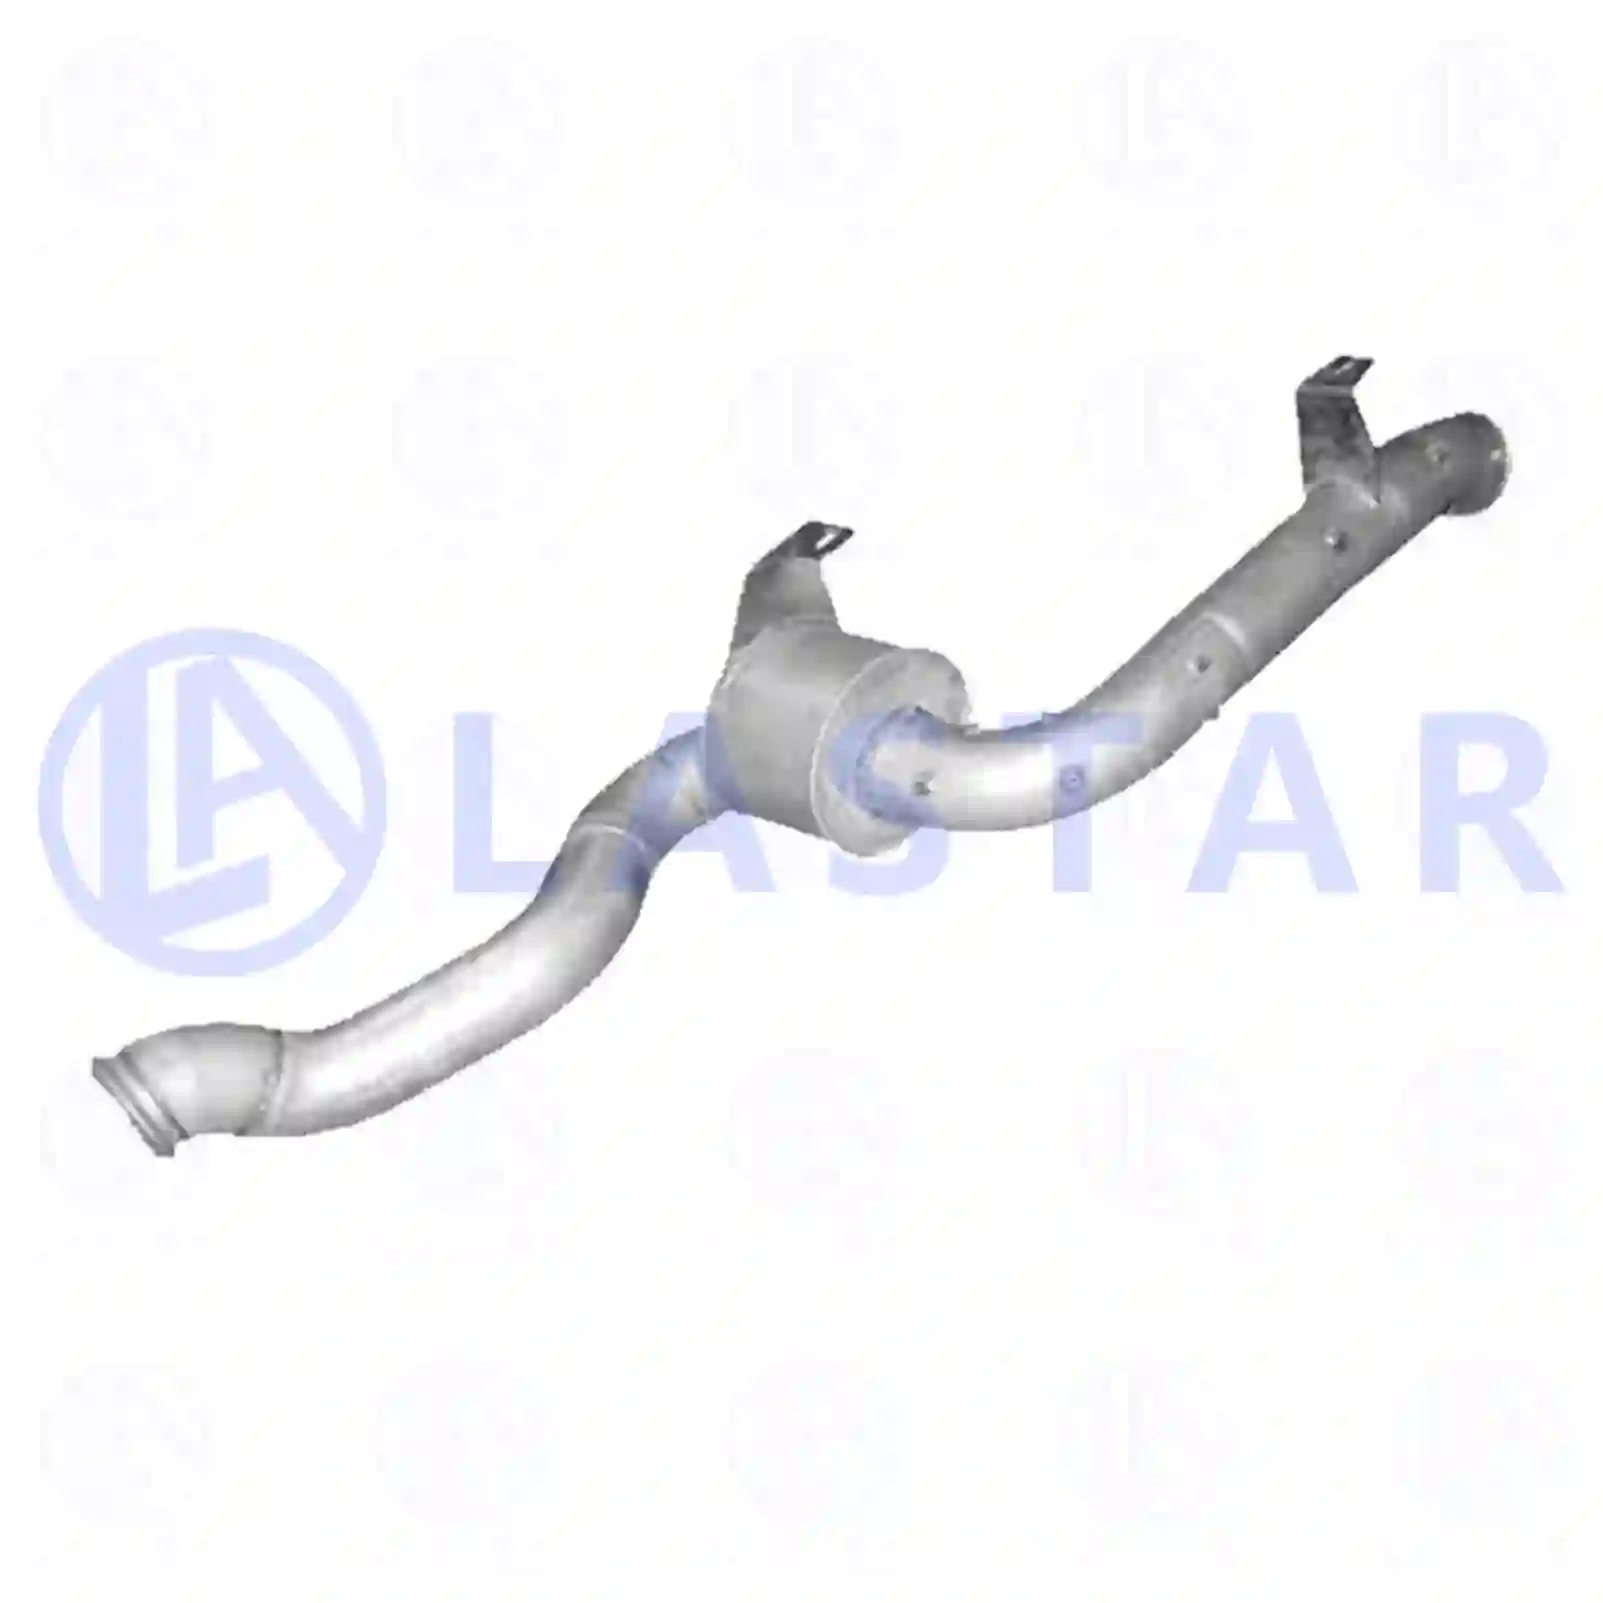 Exhaust pipe, 77706503, 1682921, 1788129 ||  77706503 Lastar Spare Part | Truck Spare Parts, Auotomotive Spare Parts Exhaust pipe, 77706503, 1682921, 1788129 ||  77706503 Lastar Spare Part | Truck Spare Parts, Auotomotive Spare Parts